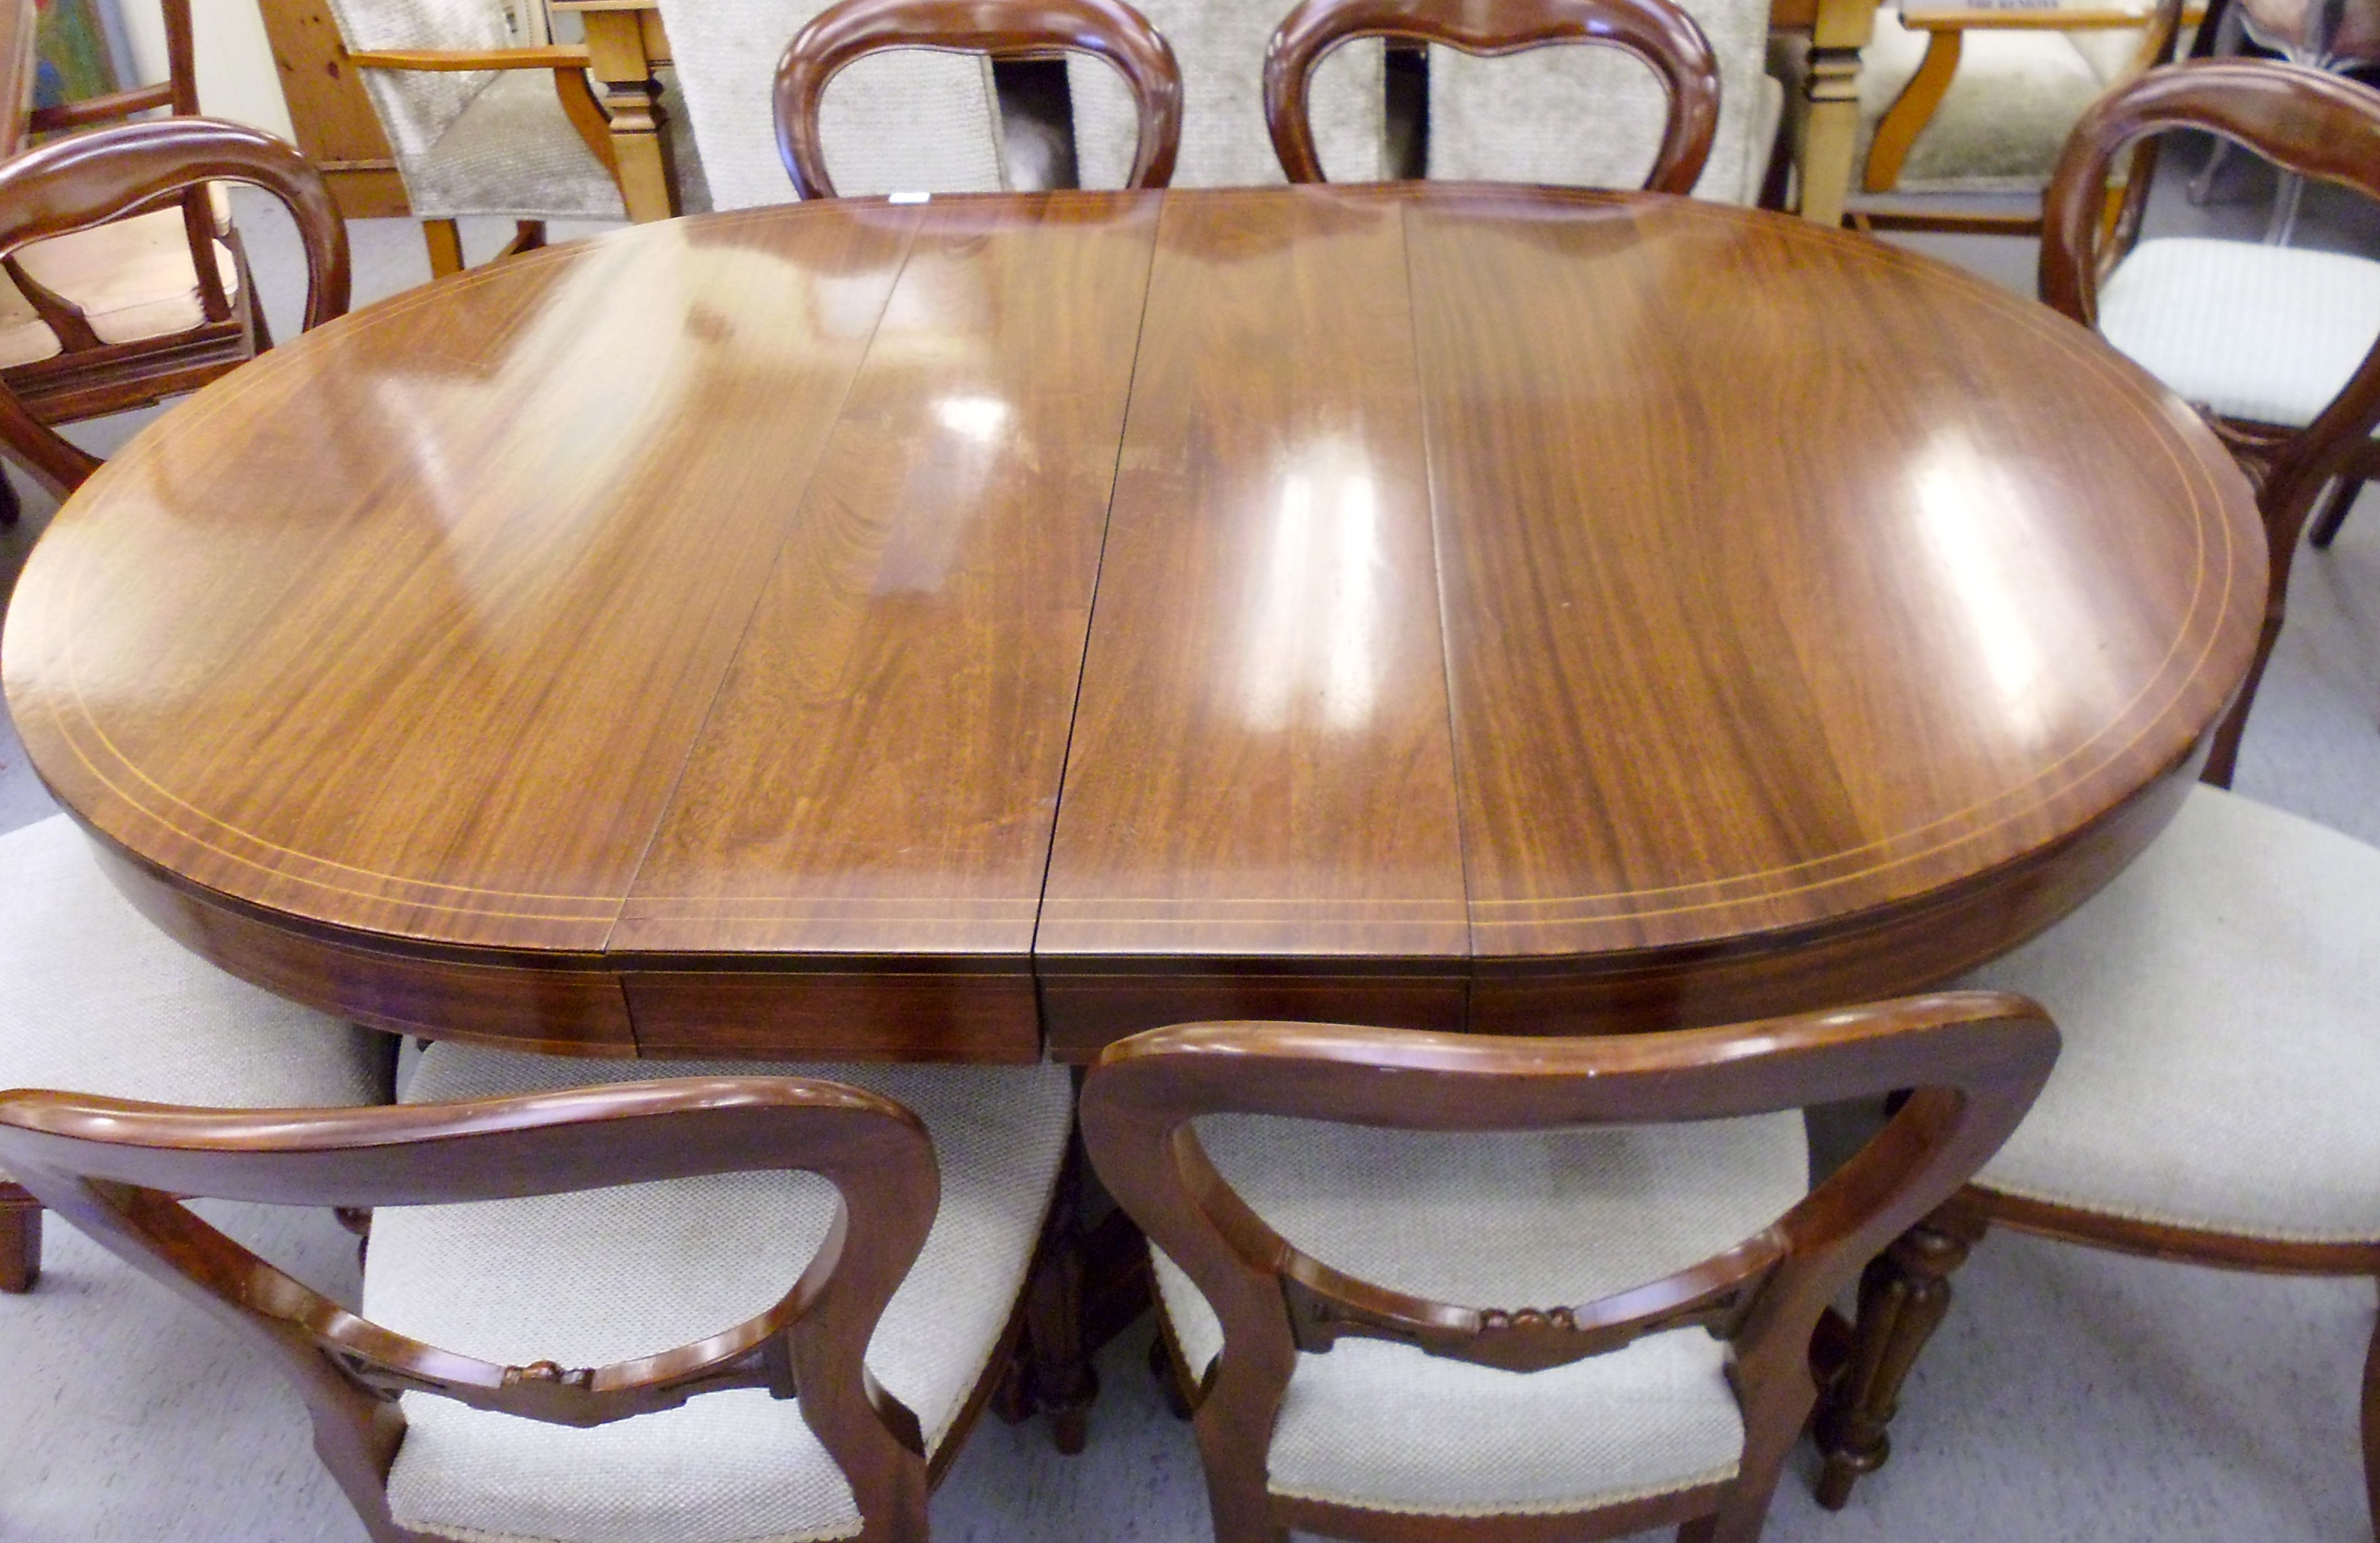 An Edwardian satinwood inlaid mahogany dining table, the top with D-shaped ends, - Image 2 of 9